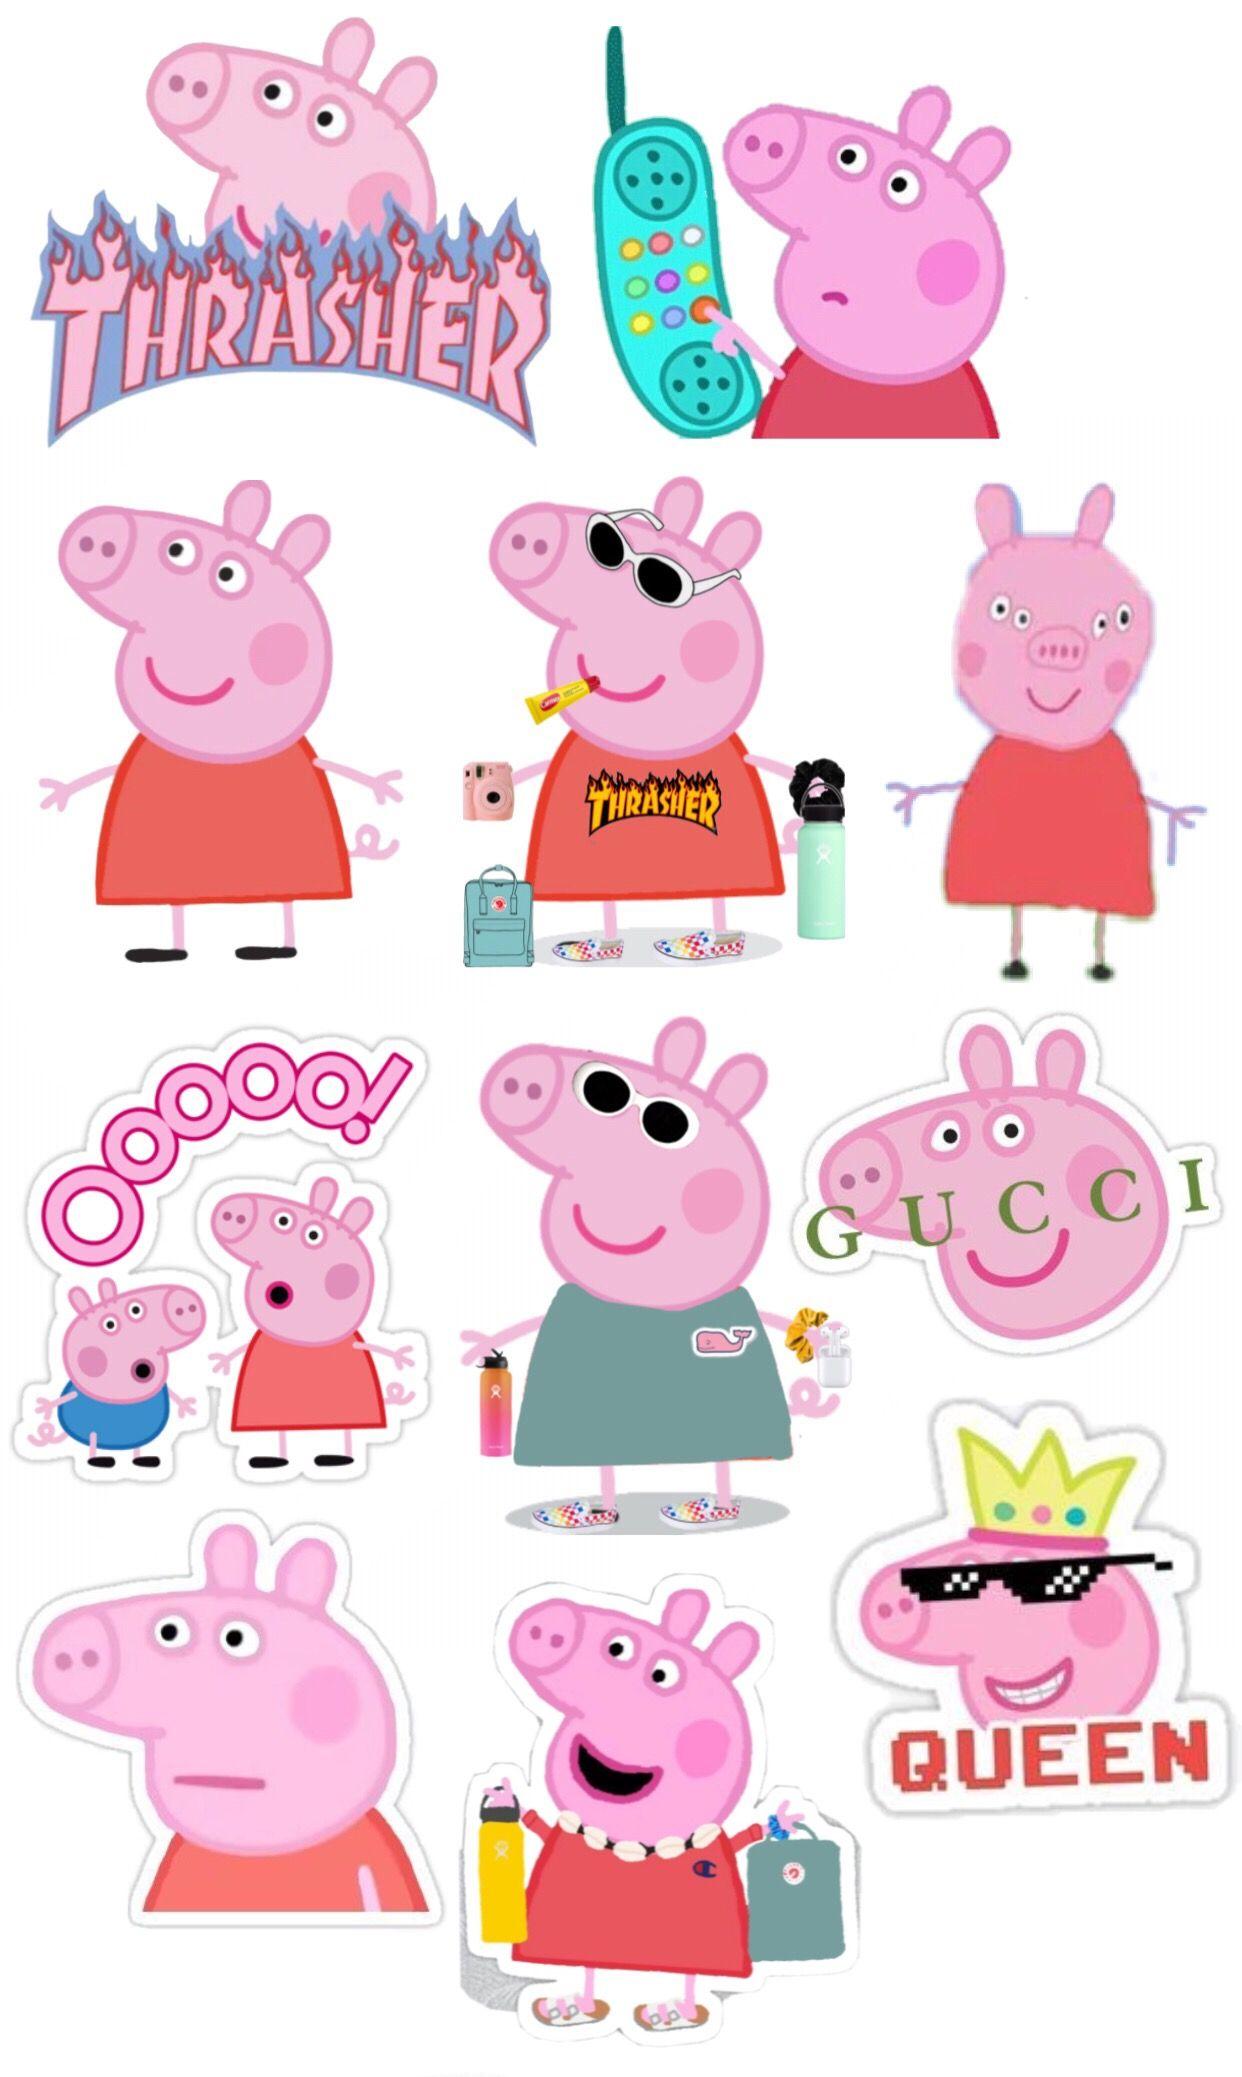 PEPPPAAAA?? WHAT ARE YOU DOING ON MY WALLPAPER?!. Stickers